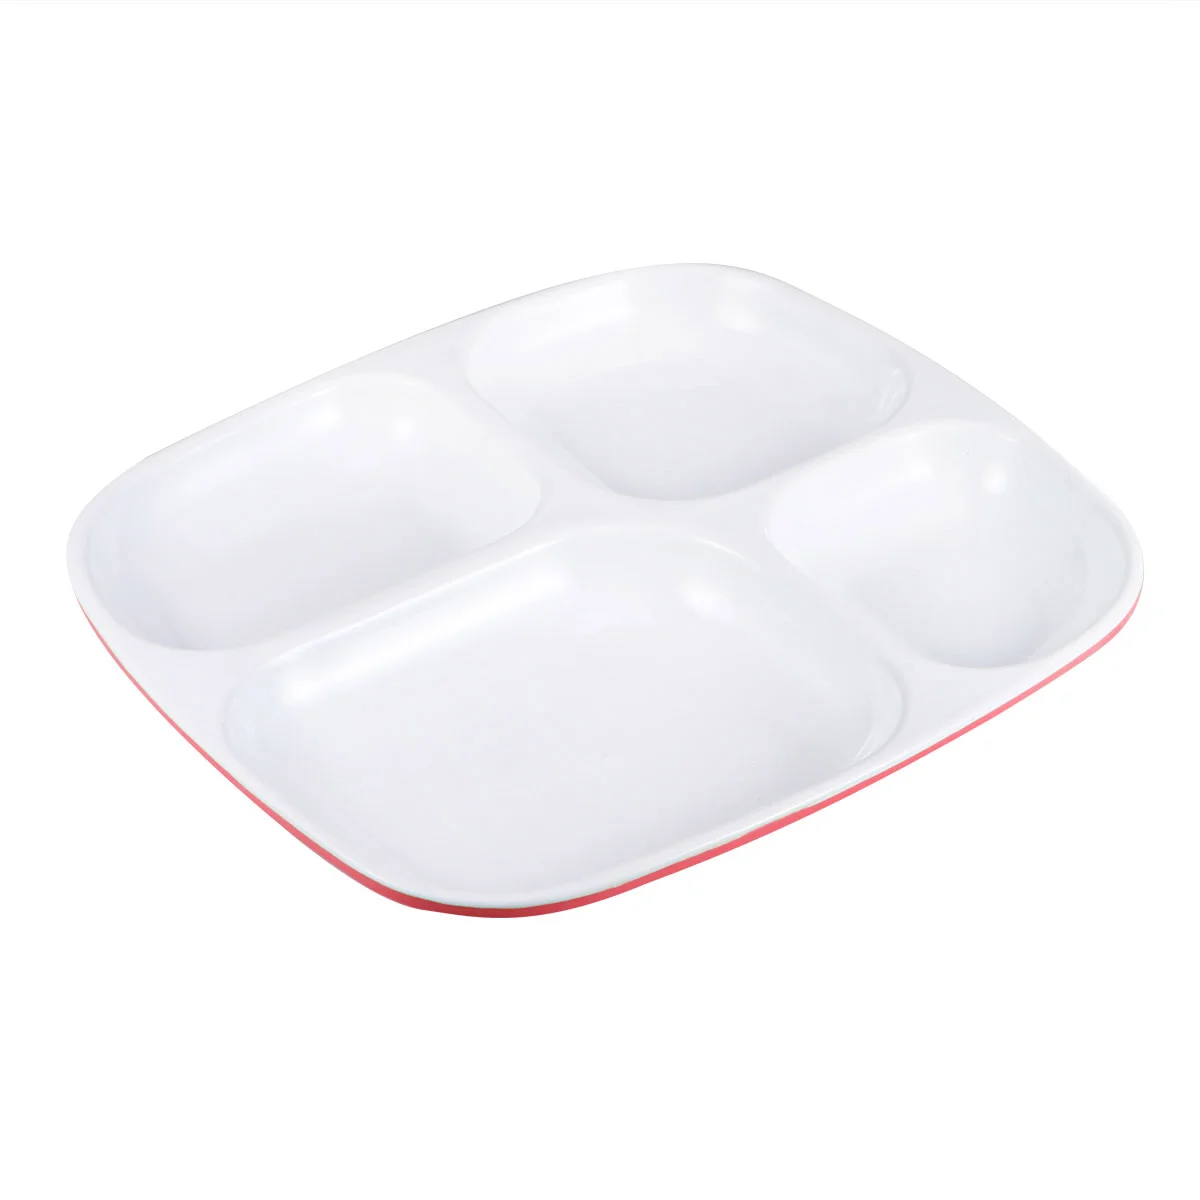 

Plates Plate Divided Dish Serving Tray Dinner Compartment Portion Control Adults Kids Lunch Meal Trays Diet Weight Melamine Loss